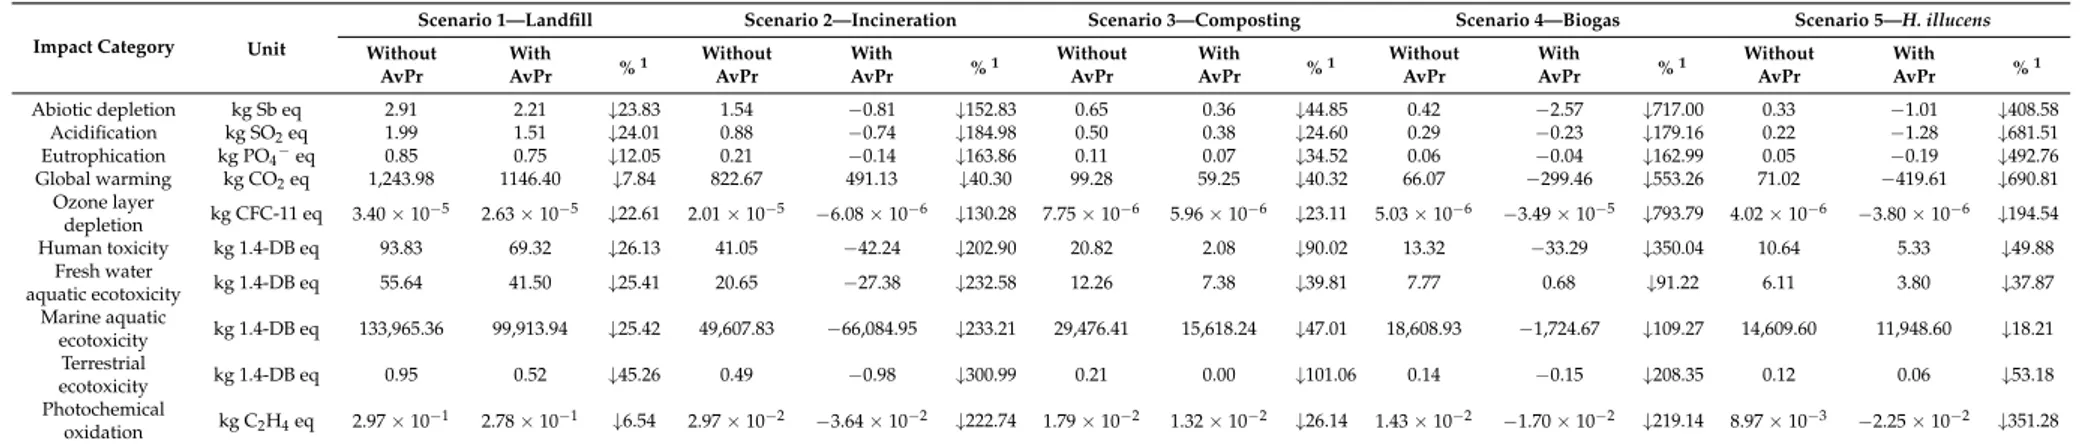 Table 5. Comparison of the characterisation results related to the functional unit of 1 tonne of FW to be treated, with and without avoided products (AvPr).